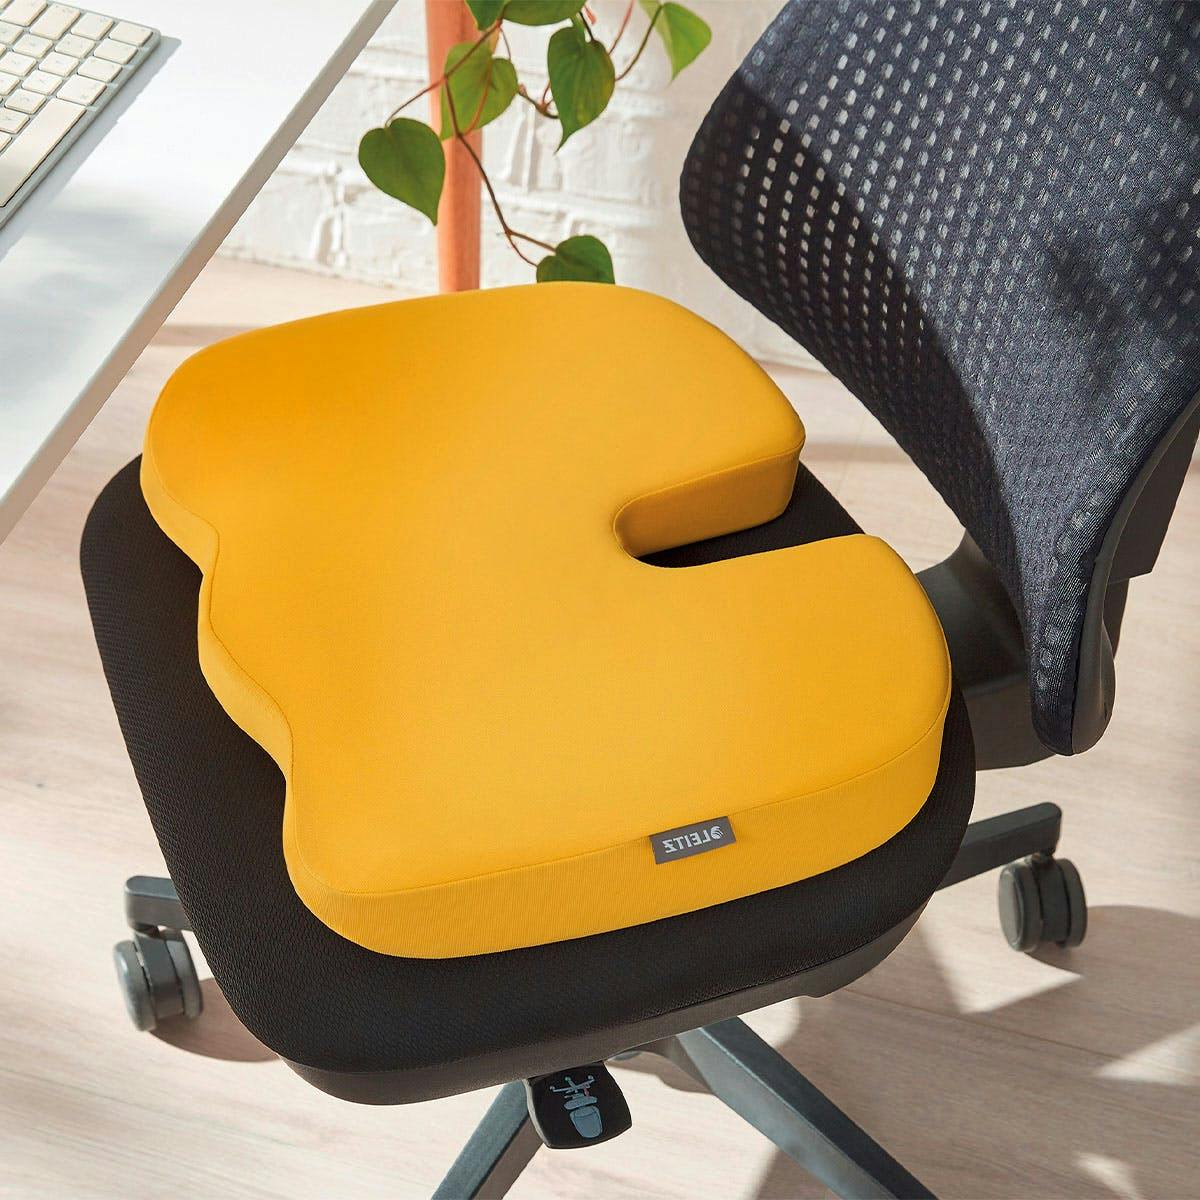 Sitting more dynamically with a seat cushion